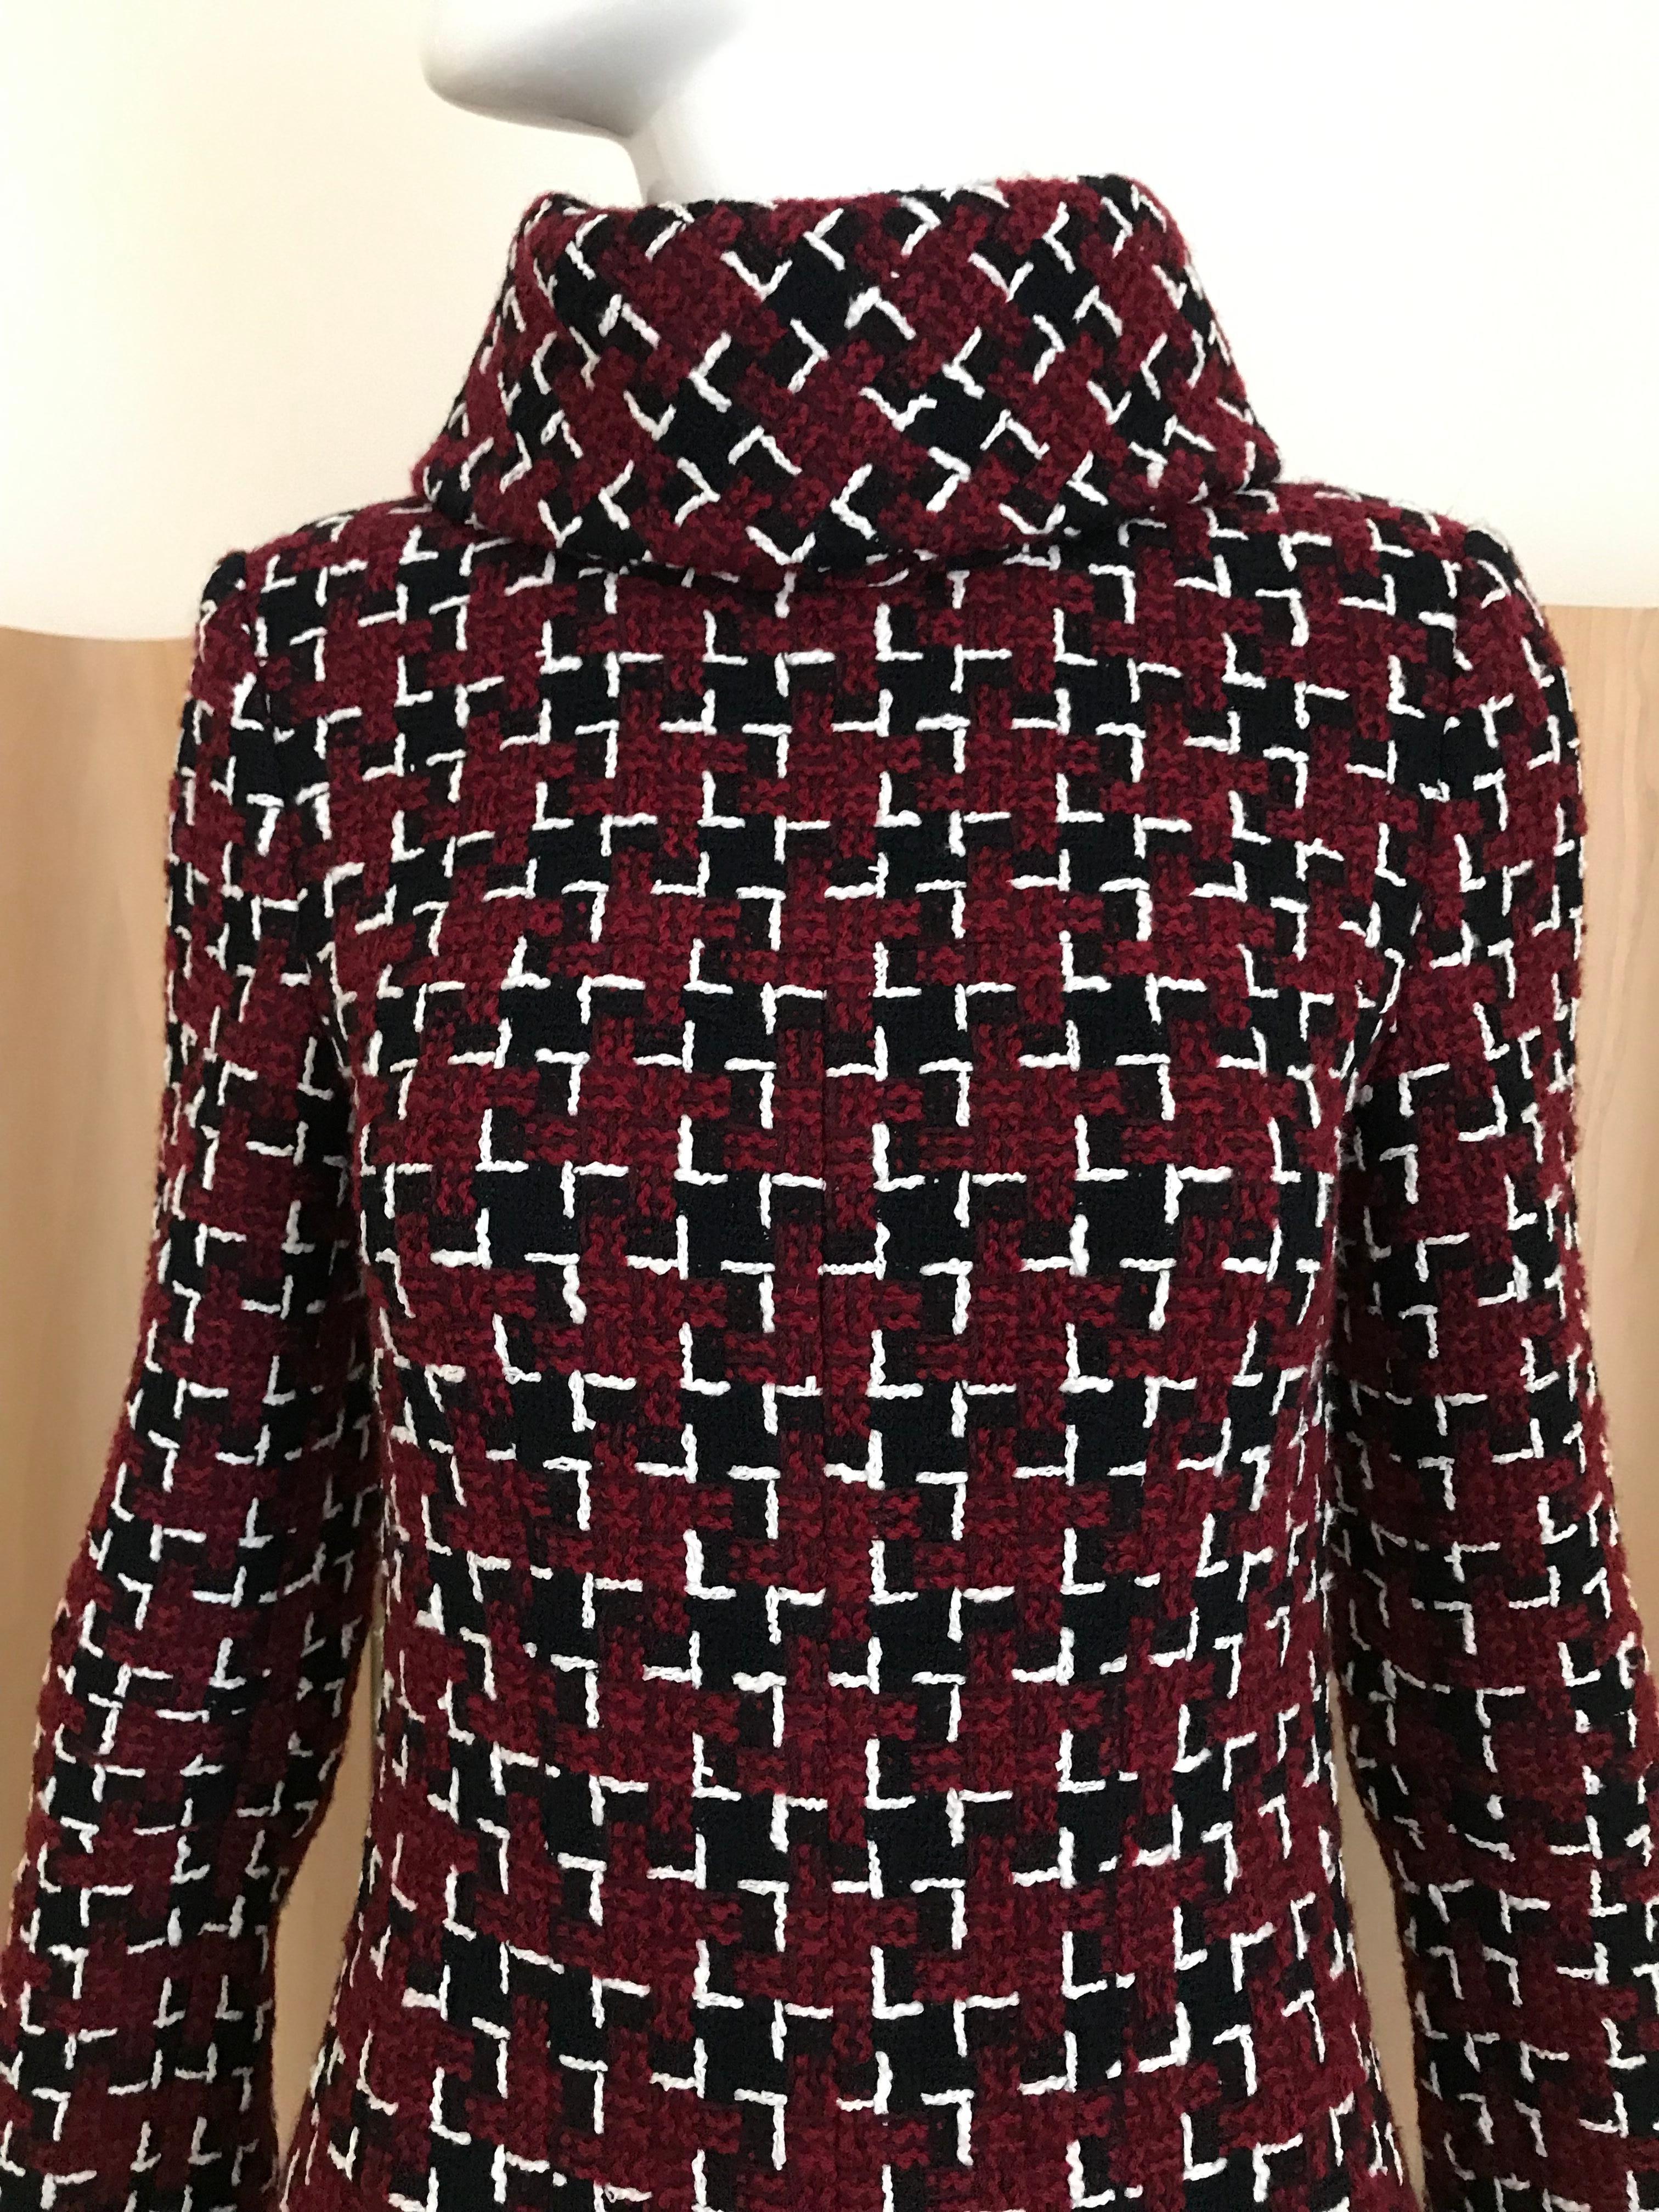 Chanel Cocktail Tweed Dress in Burgundy, Black and White New with tag 2